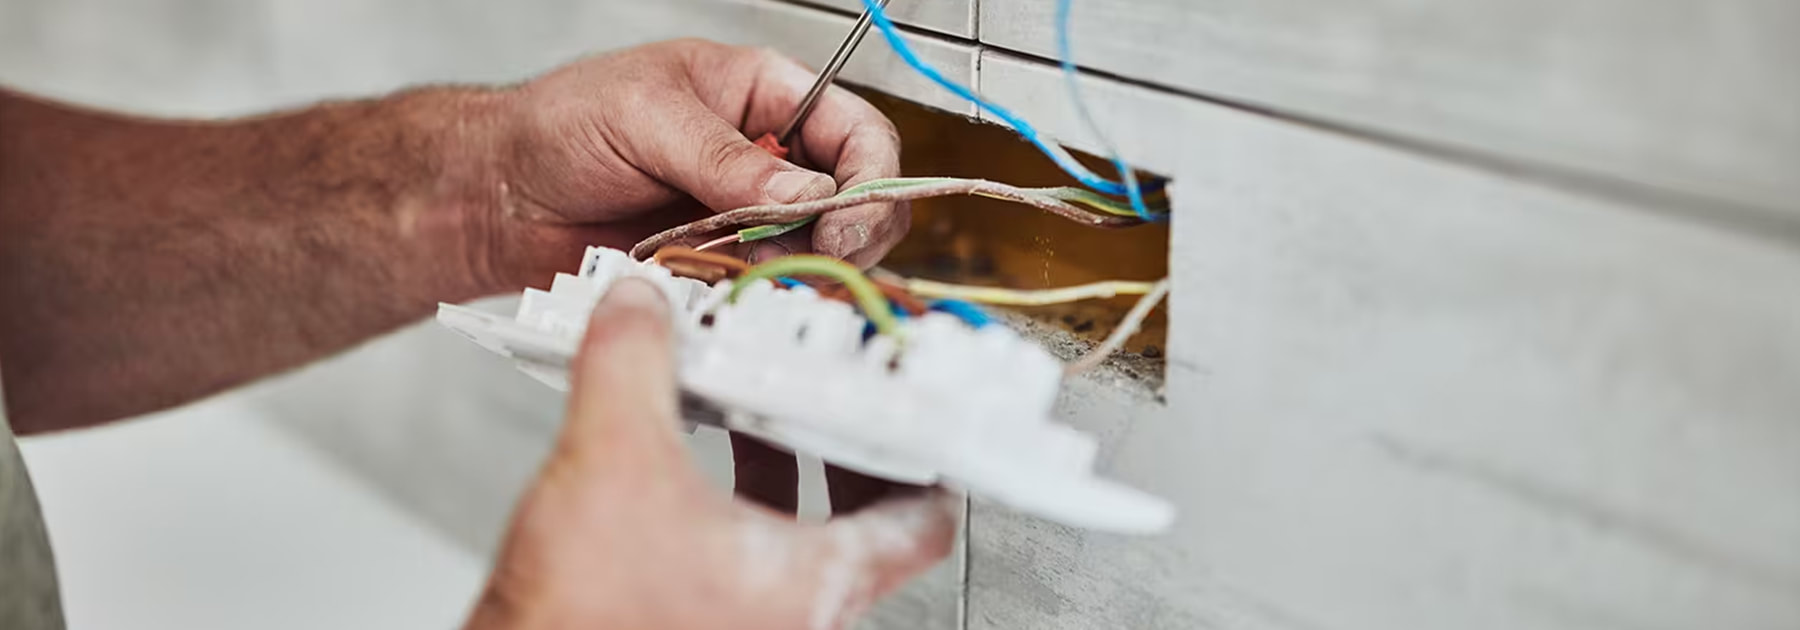 Common Issues a Residential Electrician Can Fix